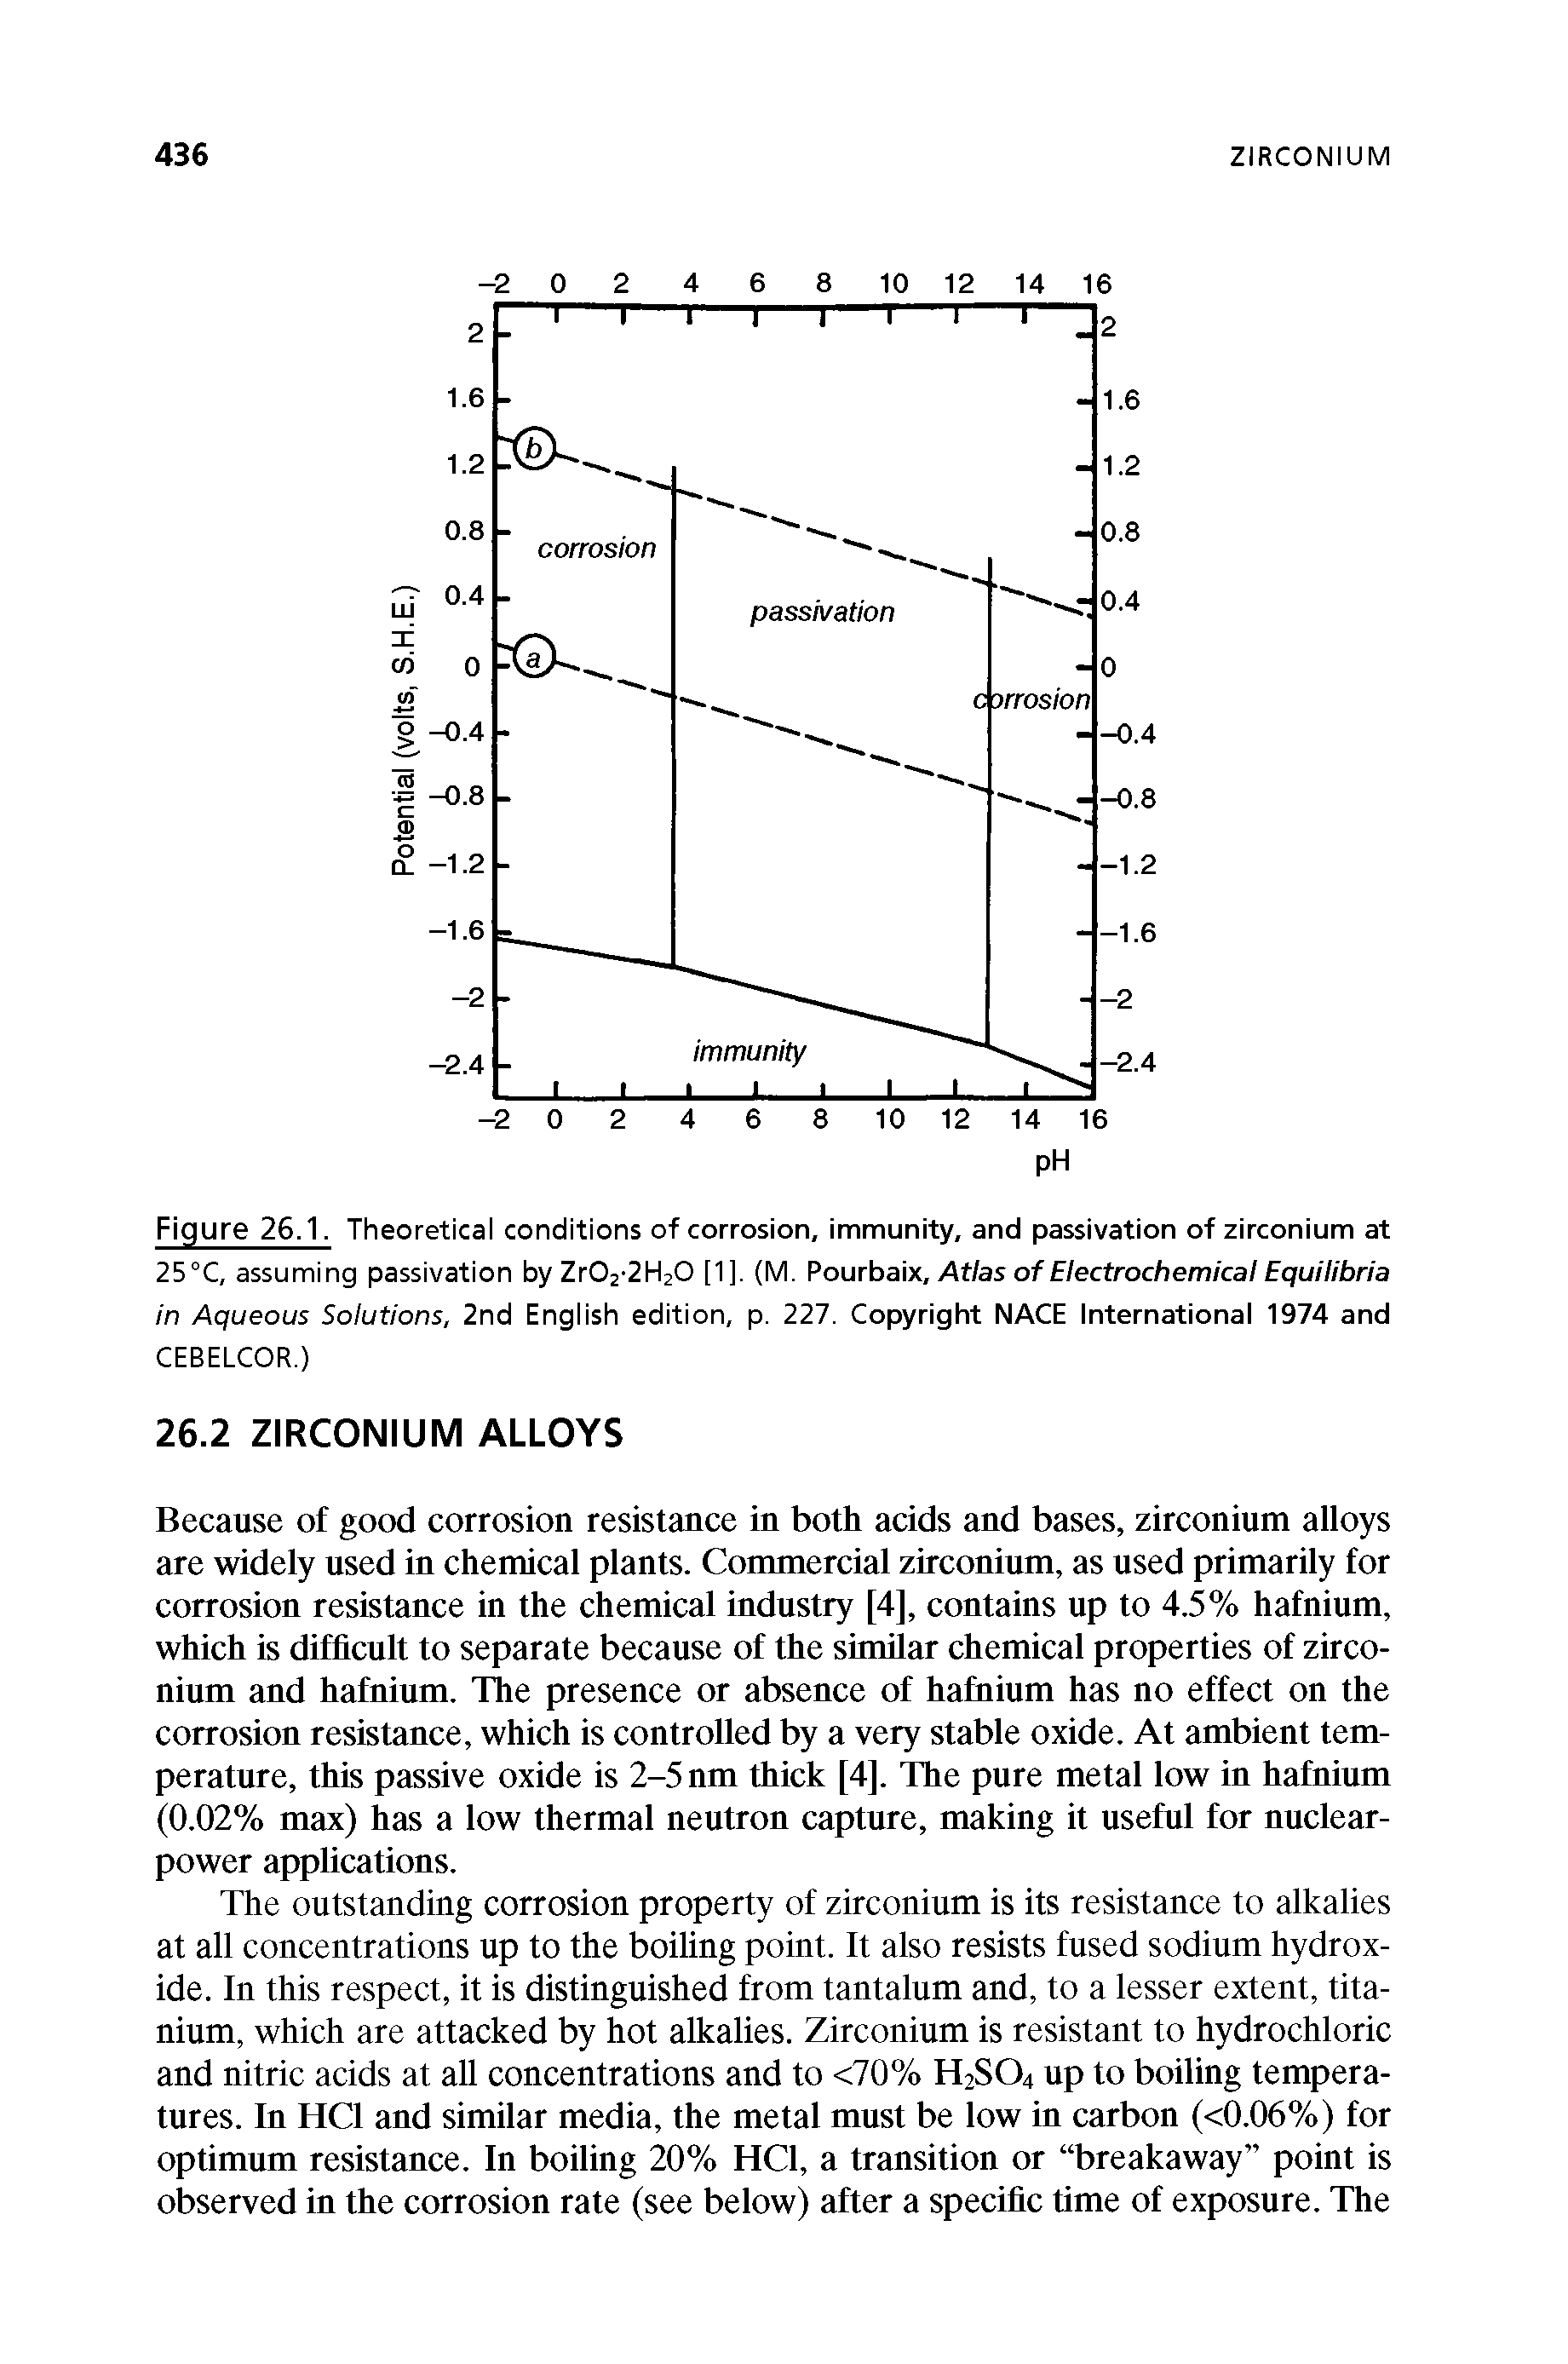 Figure 26.1. Theoretical conditions of corrosion, immunity, and passivation of zirconium at 25°C, assuming passivation by Zr02-2H20 [1], (M. Pourbaix, Atlas of Electrochemical Equilibria in Aqueous Solutions, 2nd English edition, p. 227. Copyright NACE International 1974 and...